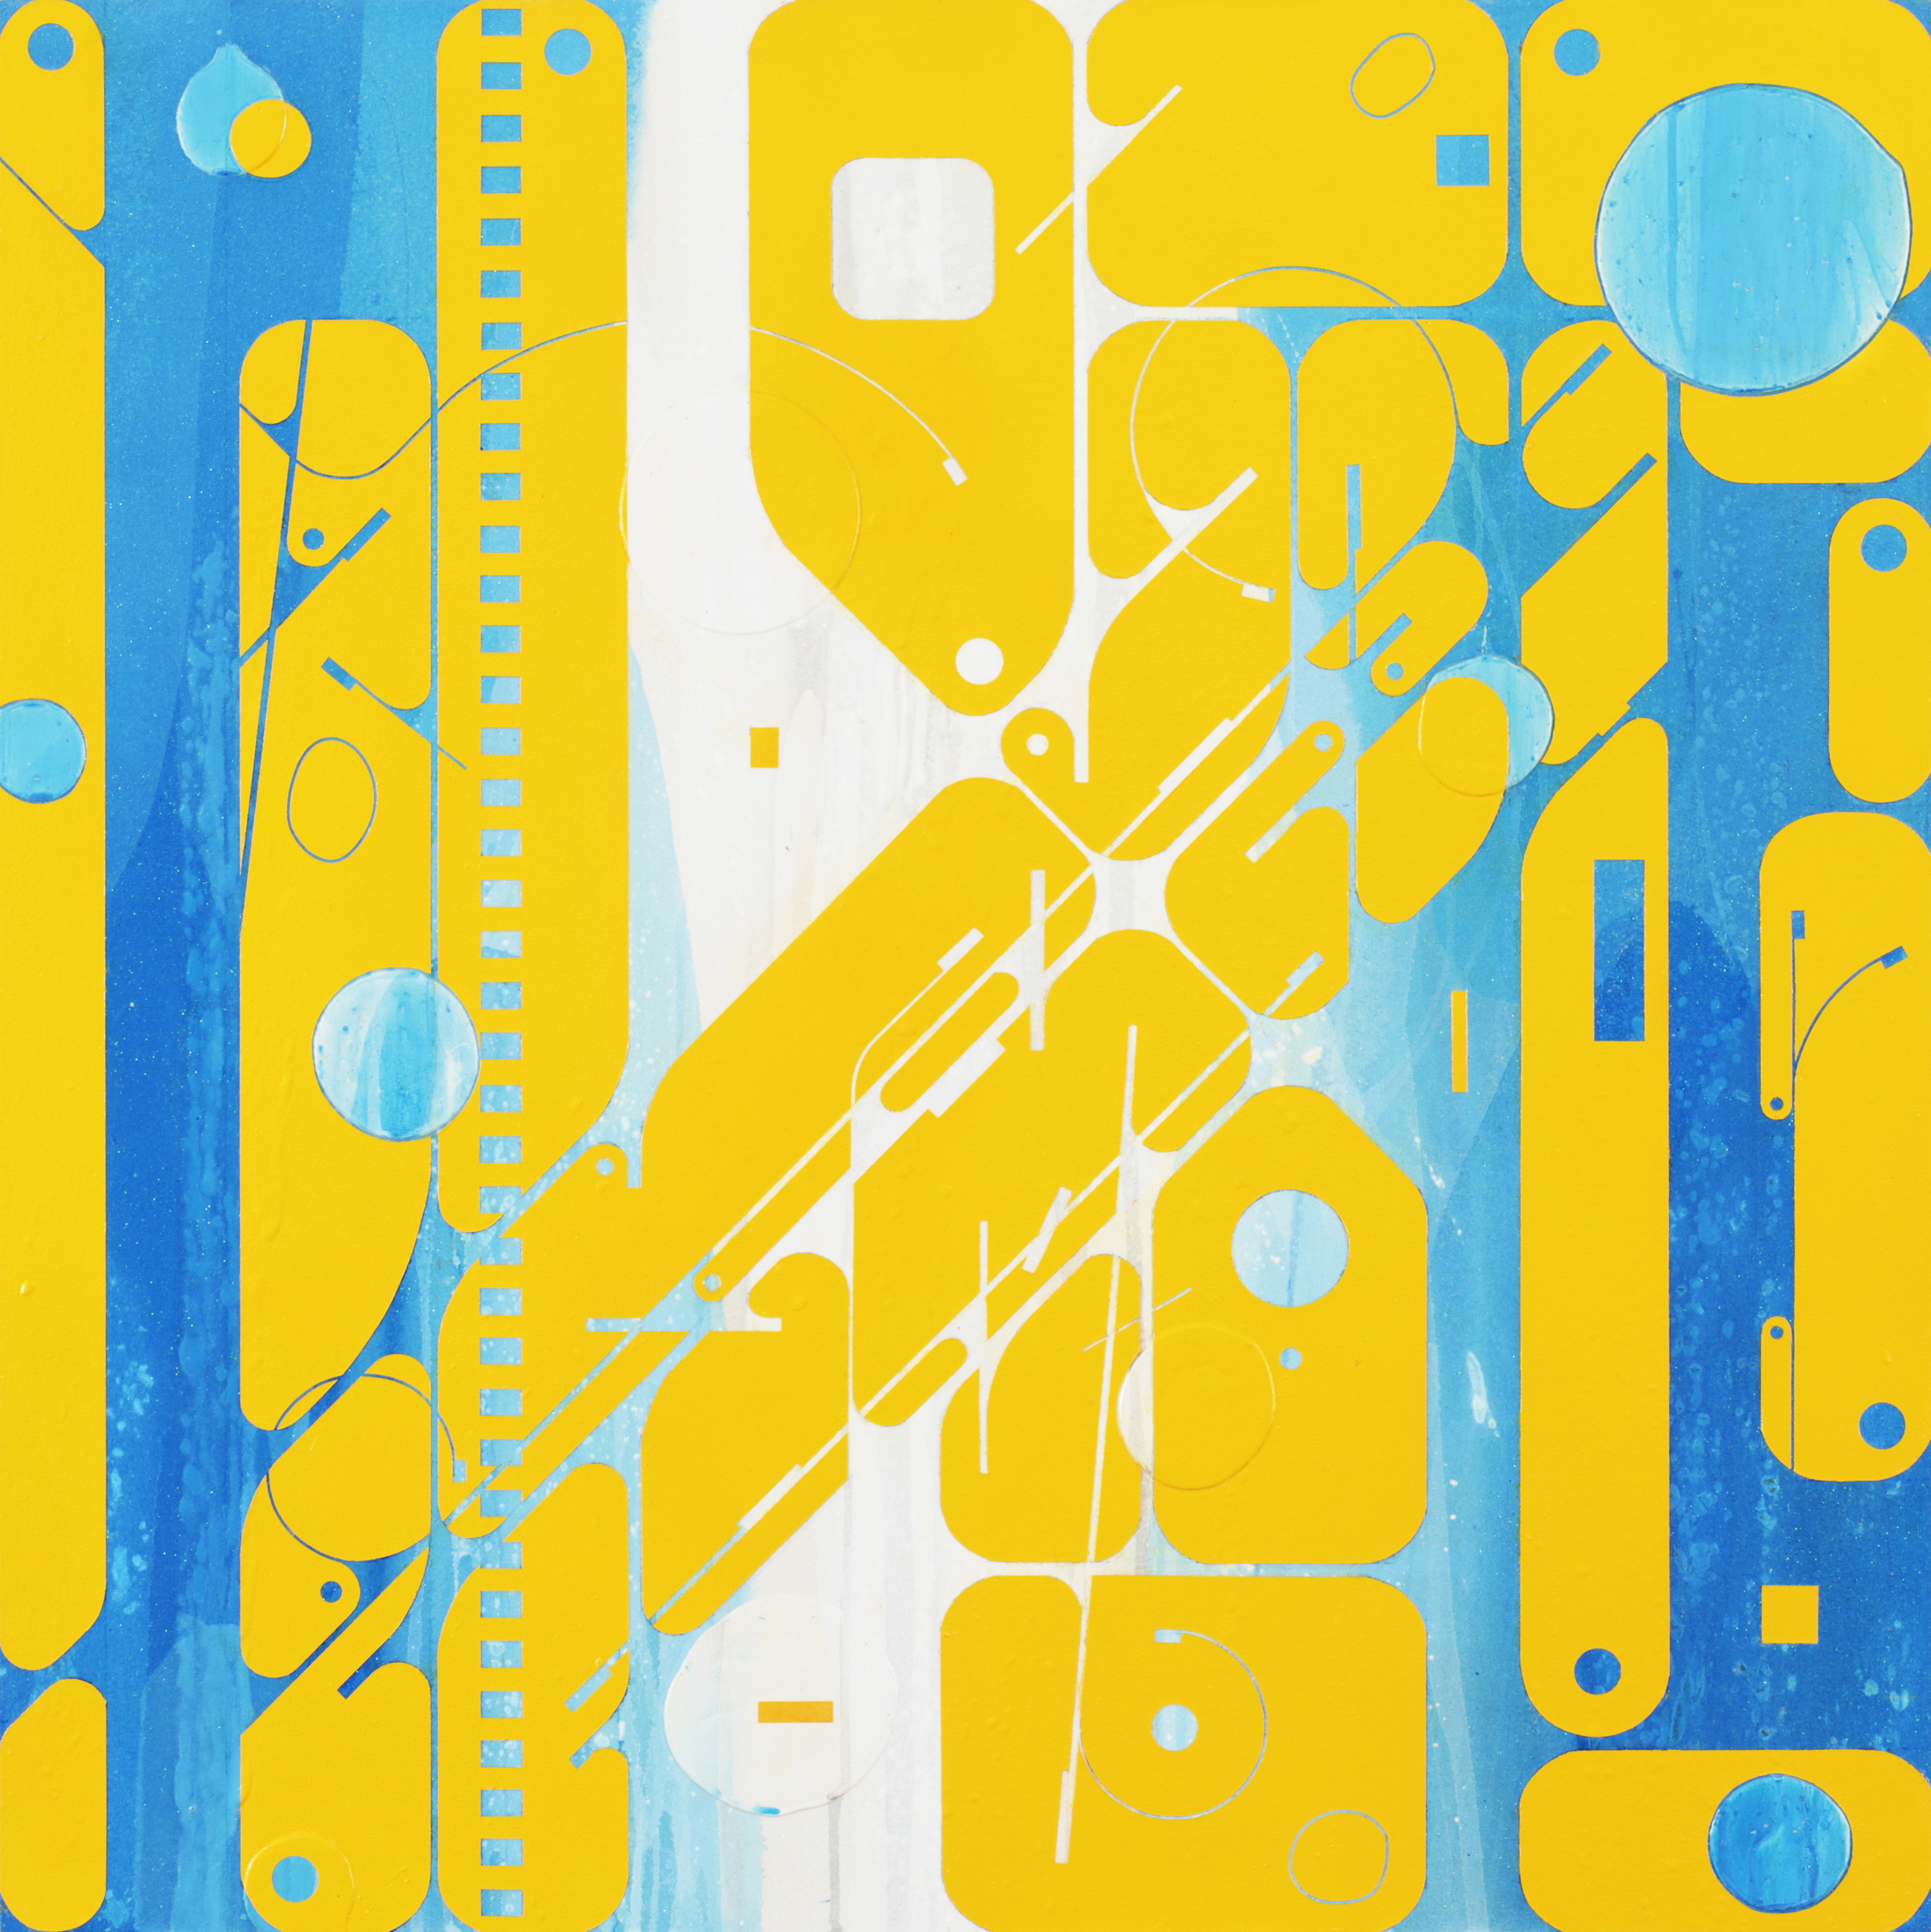 Large format abstract painting. Yellow background with blue and white abstract imagery on top. Imagery almost looks mechanical. 